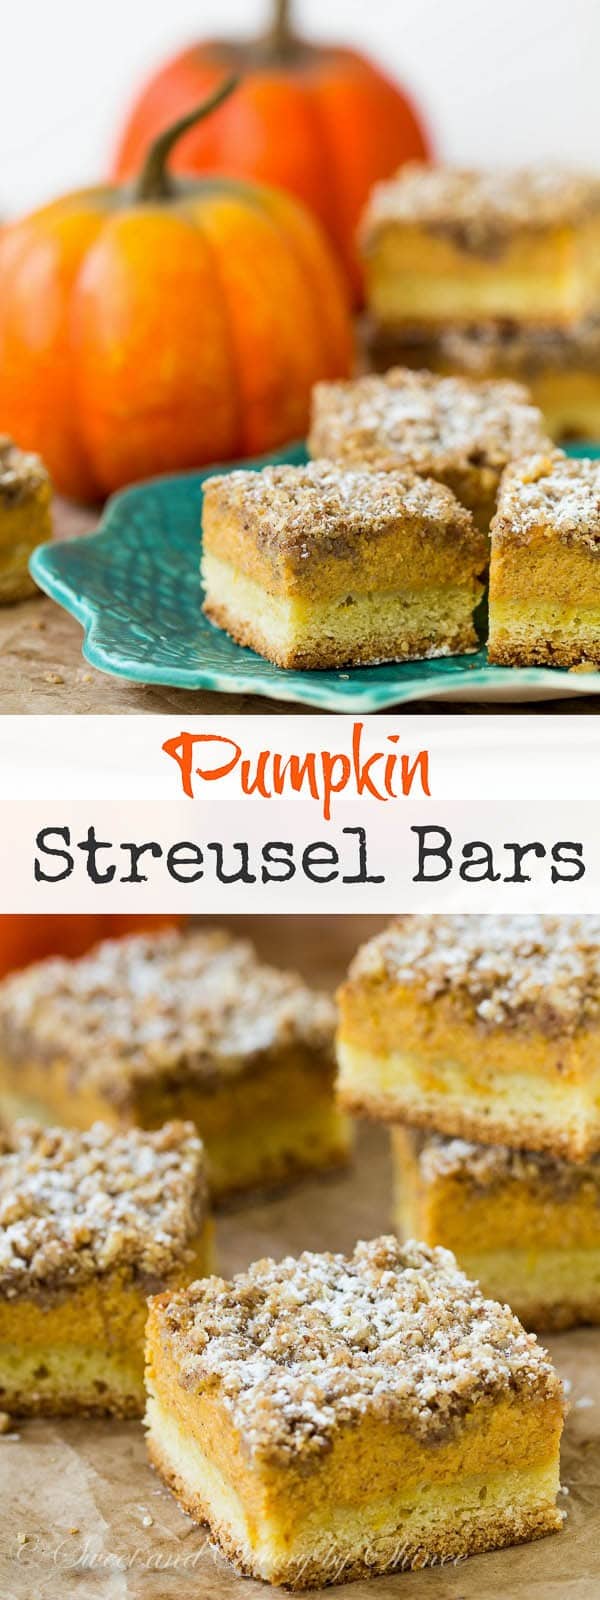 3 incredible layers of cake crust, smooth and creamy pumpkin filling and crumbly. buttery streusel topping make these pumpkin streusel bars out-of-this-world delicious!